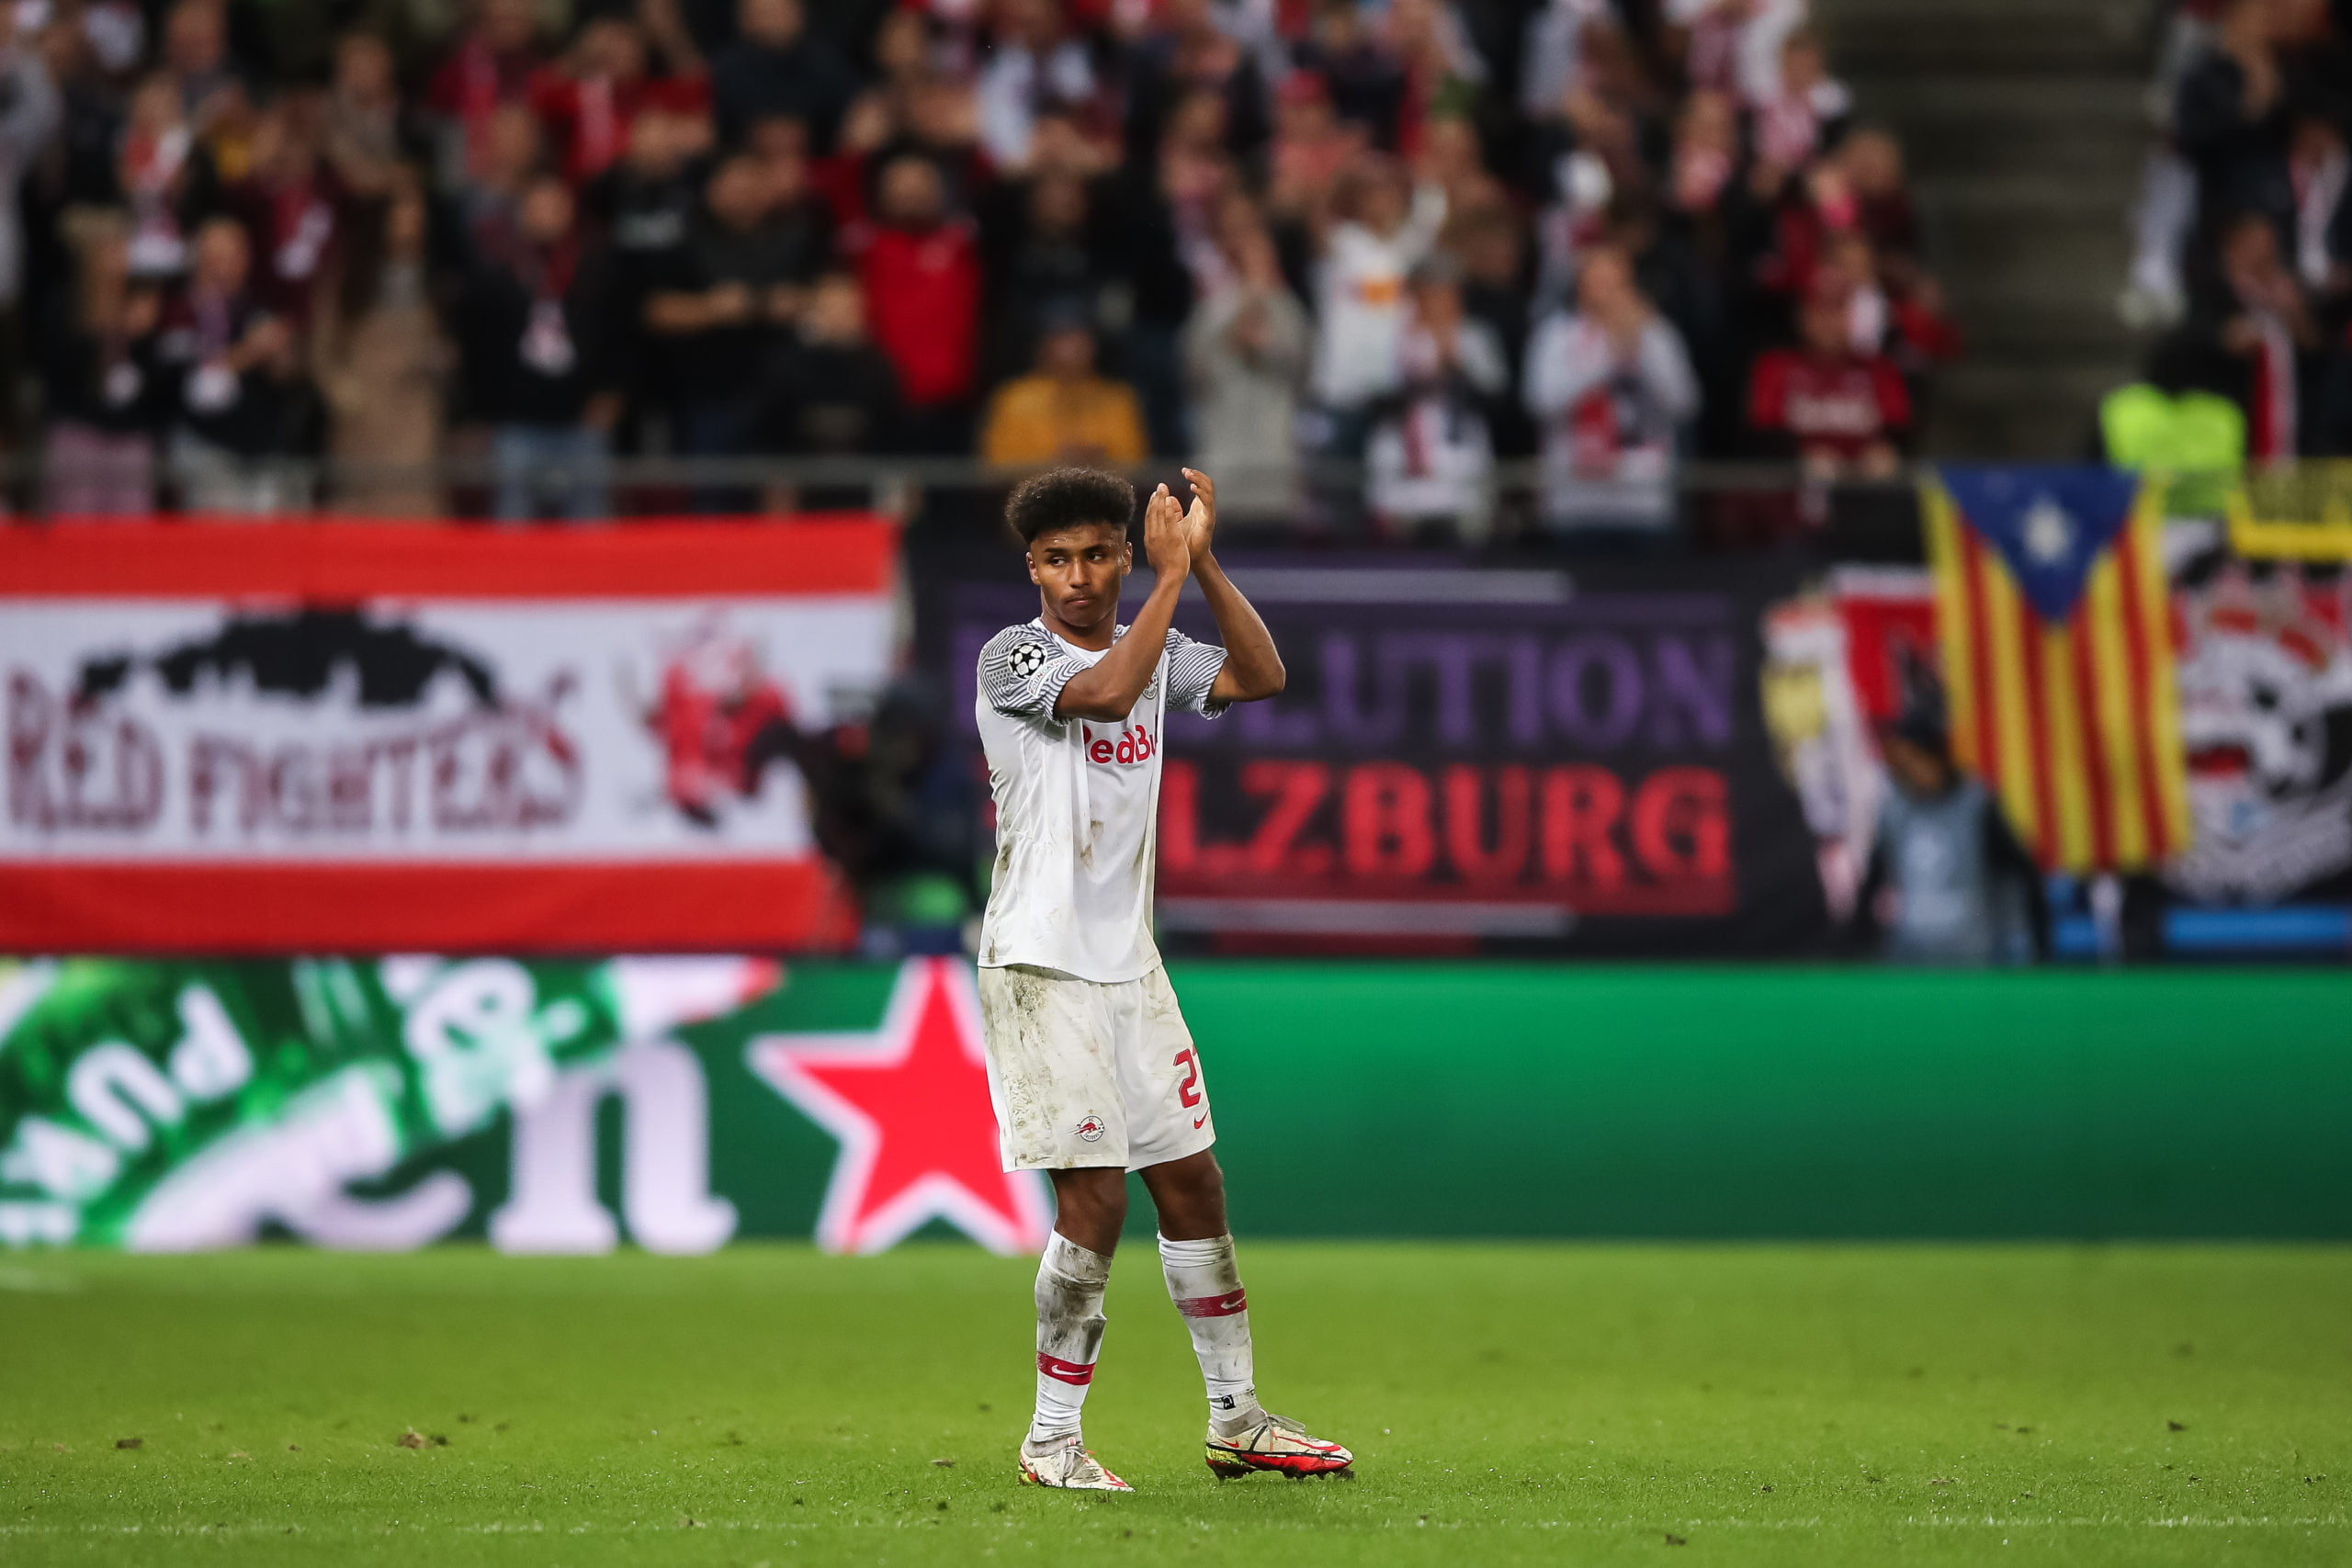 SALZBURG, AUSTRIA - SEPTEMBER 29: Karim Adeyemi of FC Red Bull Salzburg reacts during the UEFA Champions League group G match between FC Red Bull Salzburg and Lille OSC at Stadion Salzburg on September 29, 2021 in Salzburg, Austria. (Photo by Christian Kaspar-Bartke/Getty Images)The 4th Official uses images provided by the following image agency:
Getty Images (https://www.gettyimages.de/)
Imago Images (https://www.imago-images.de/)